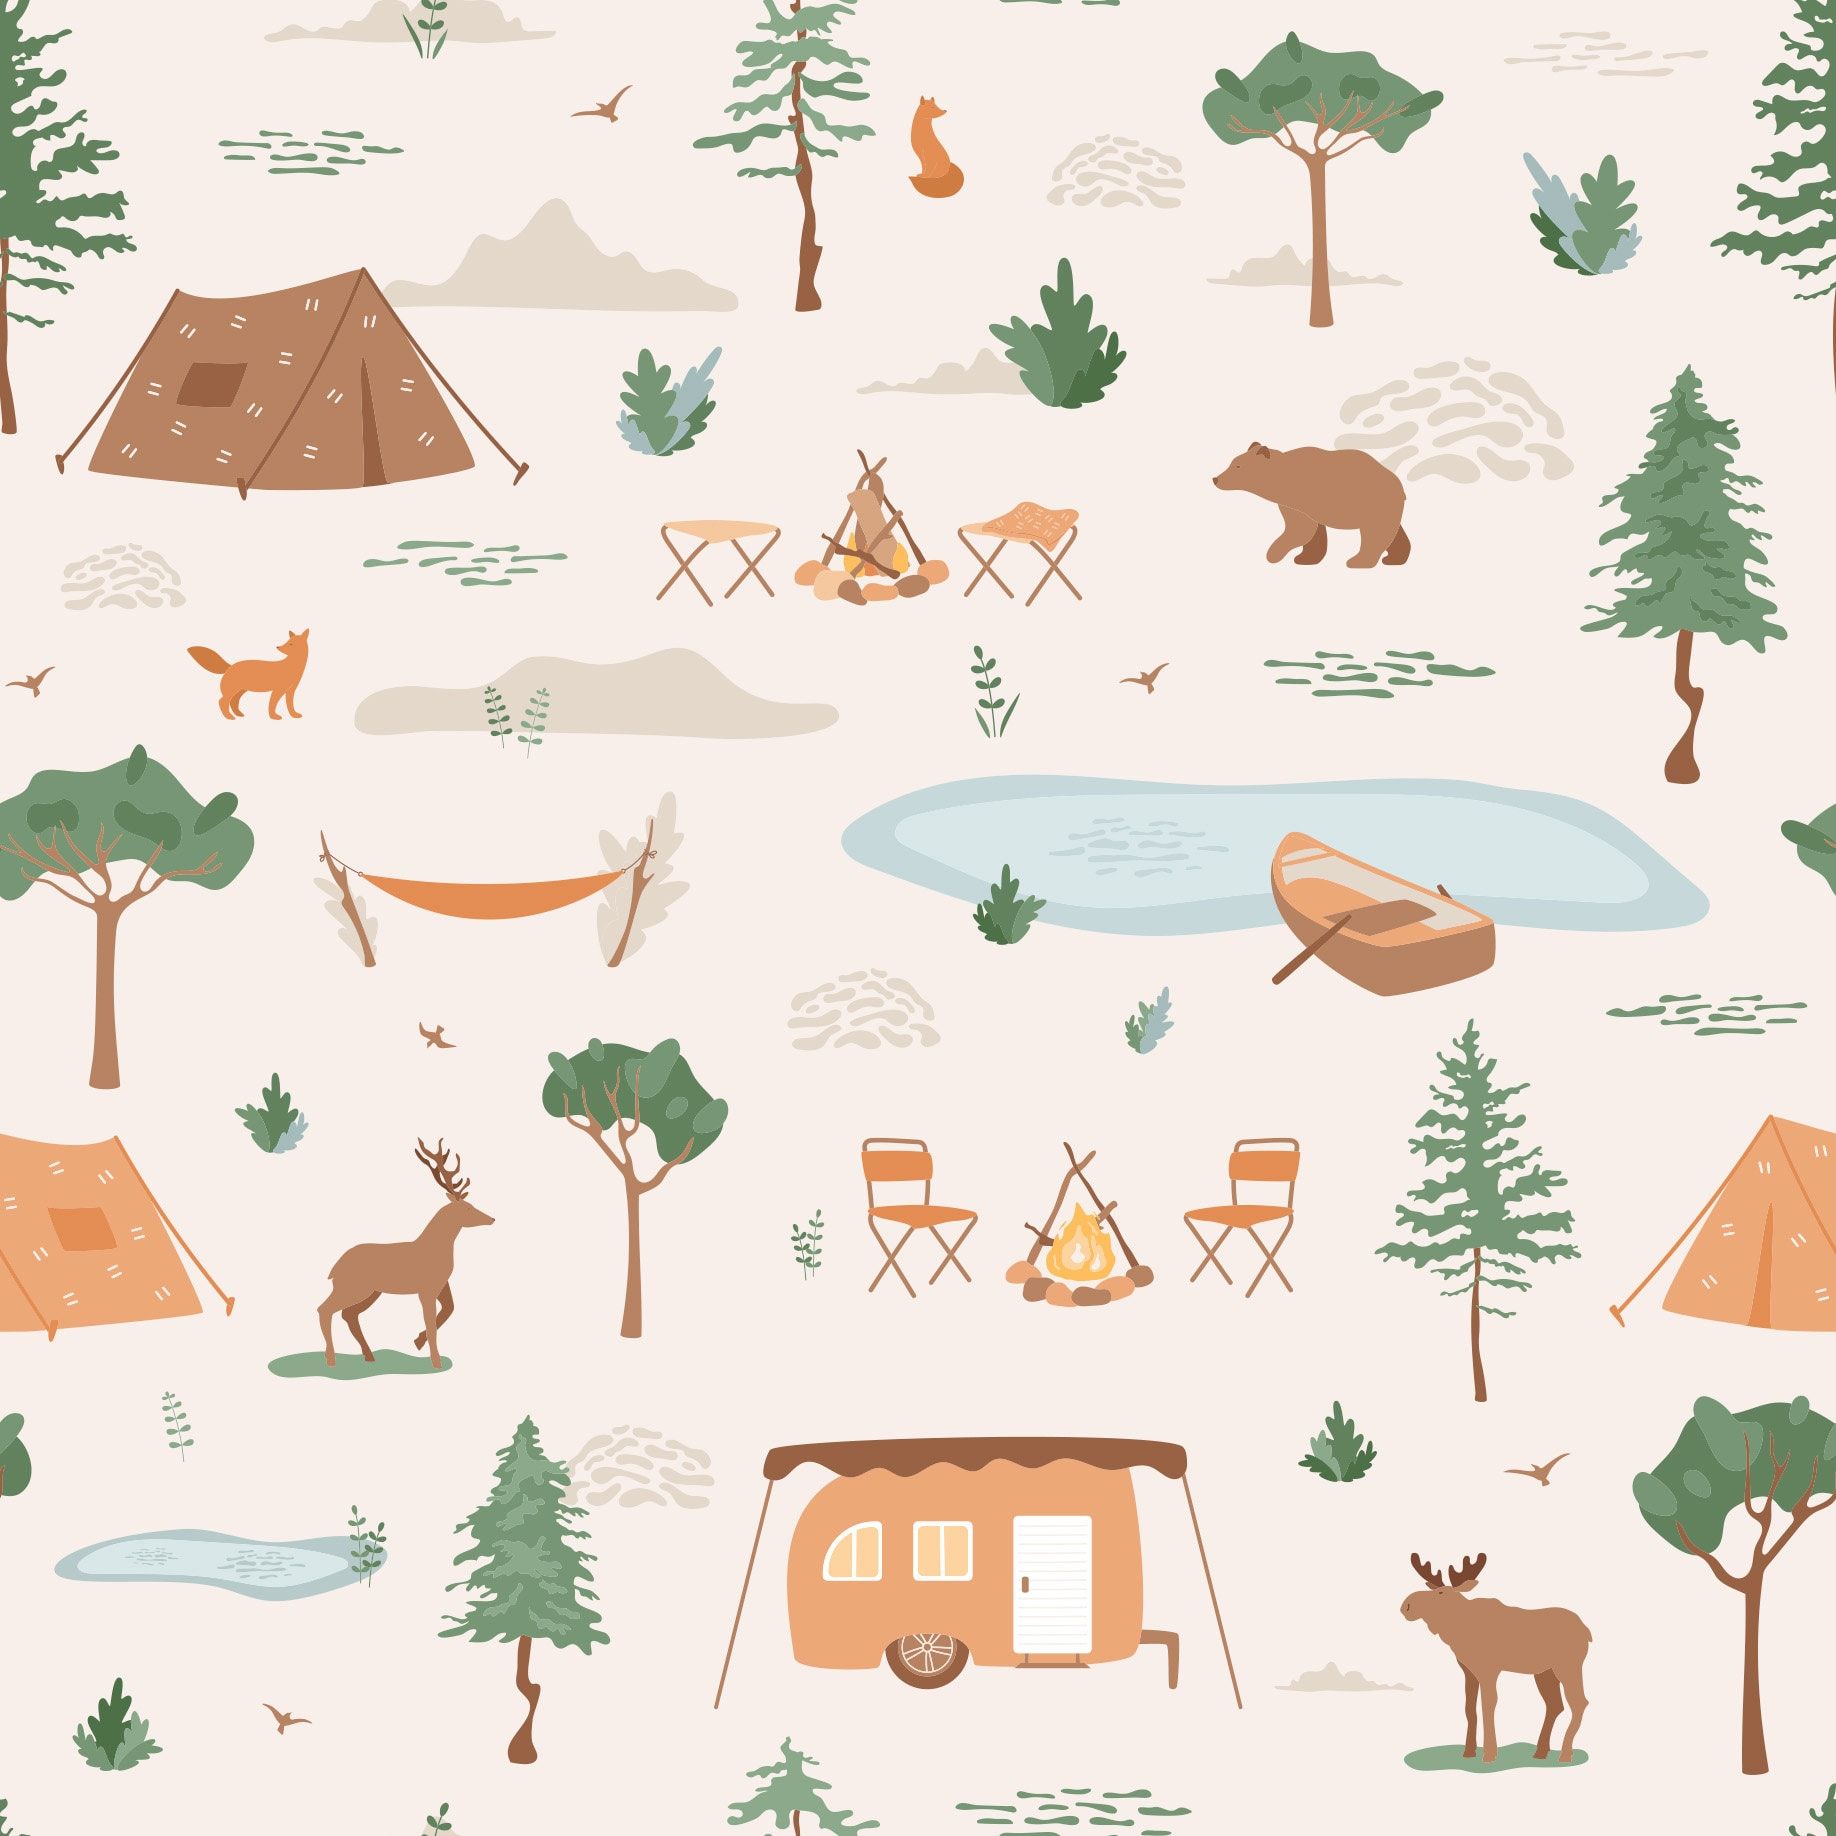 A camping themed pattern with tents, animals, and campfires. - Camping